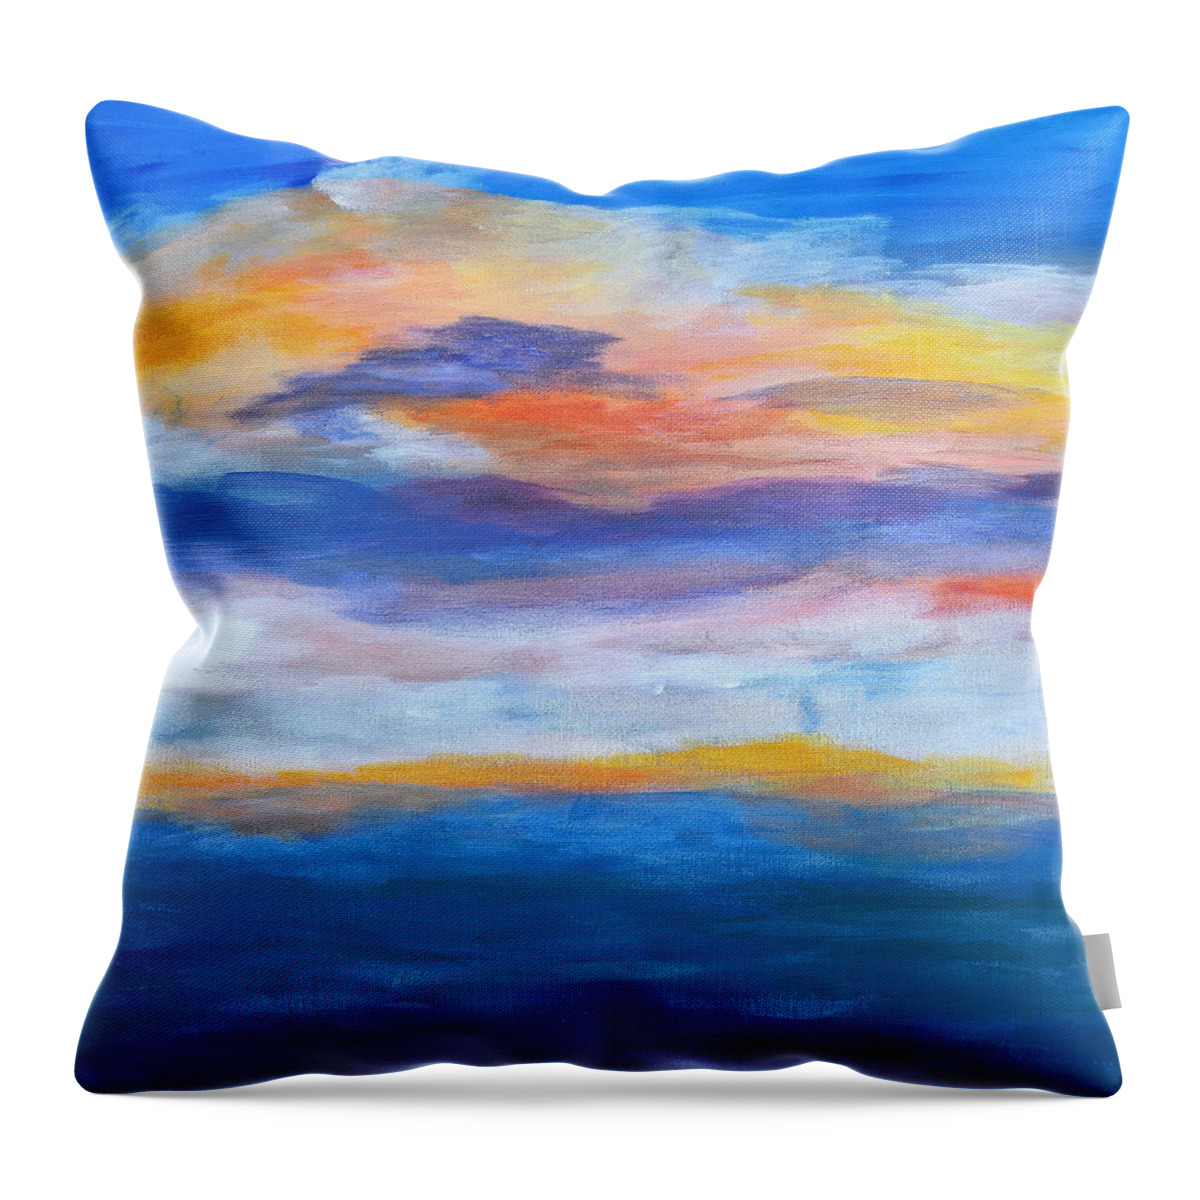 Sunset Throw Pillow featuring the painting Sailors' Delight by Mark C Jackson